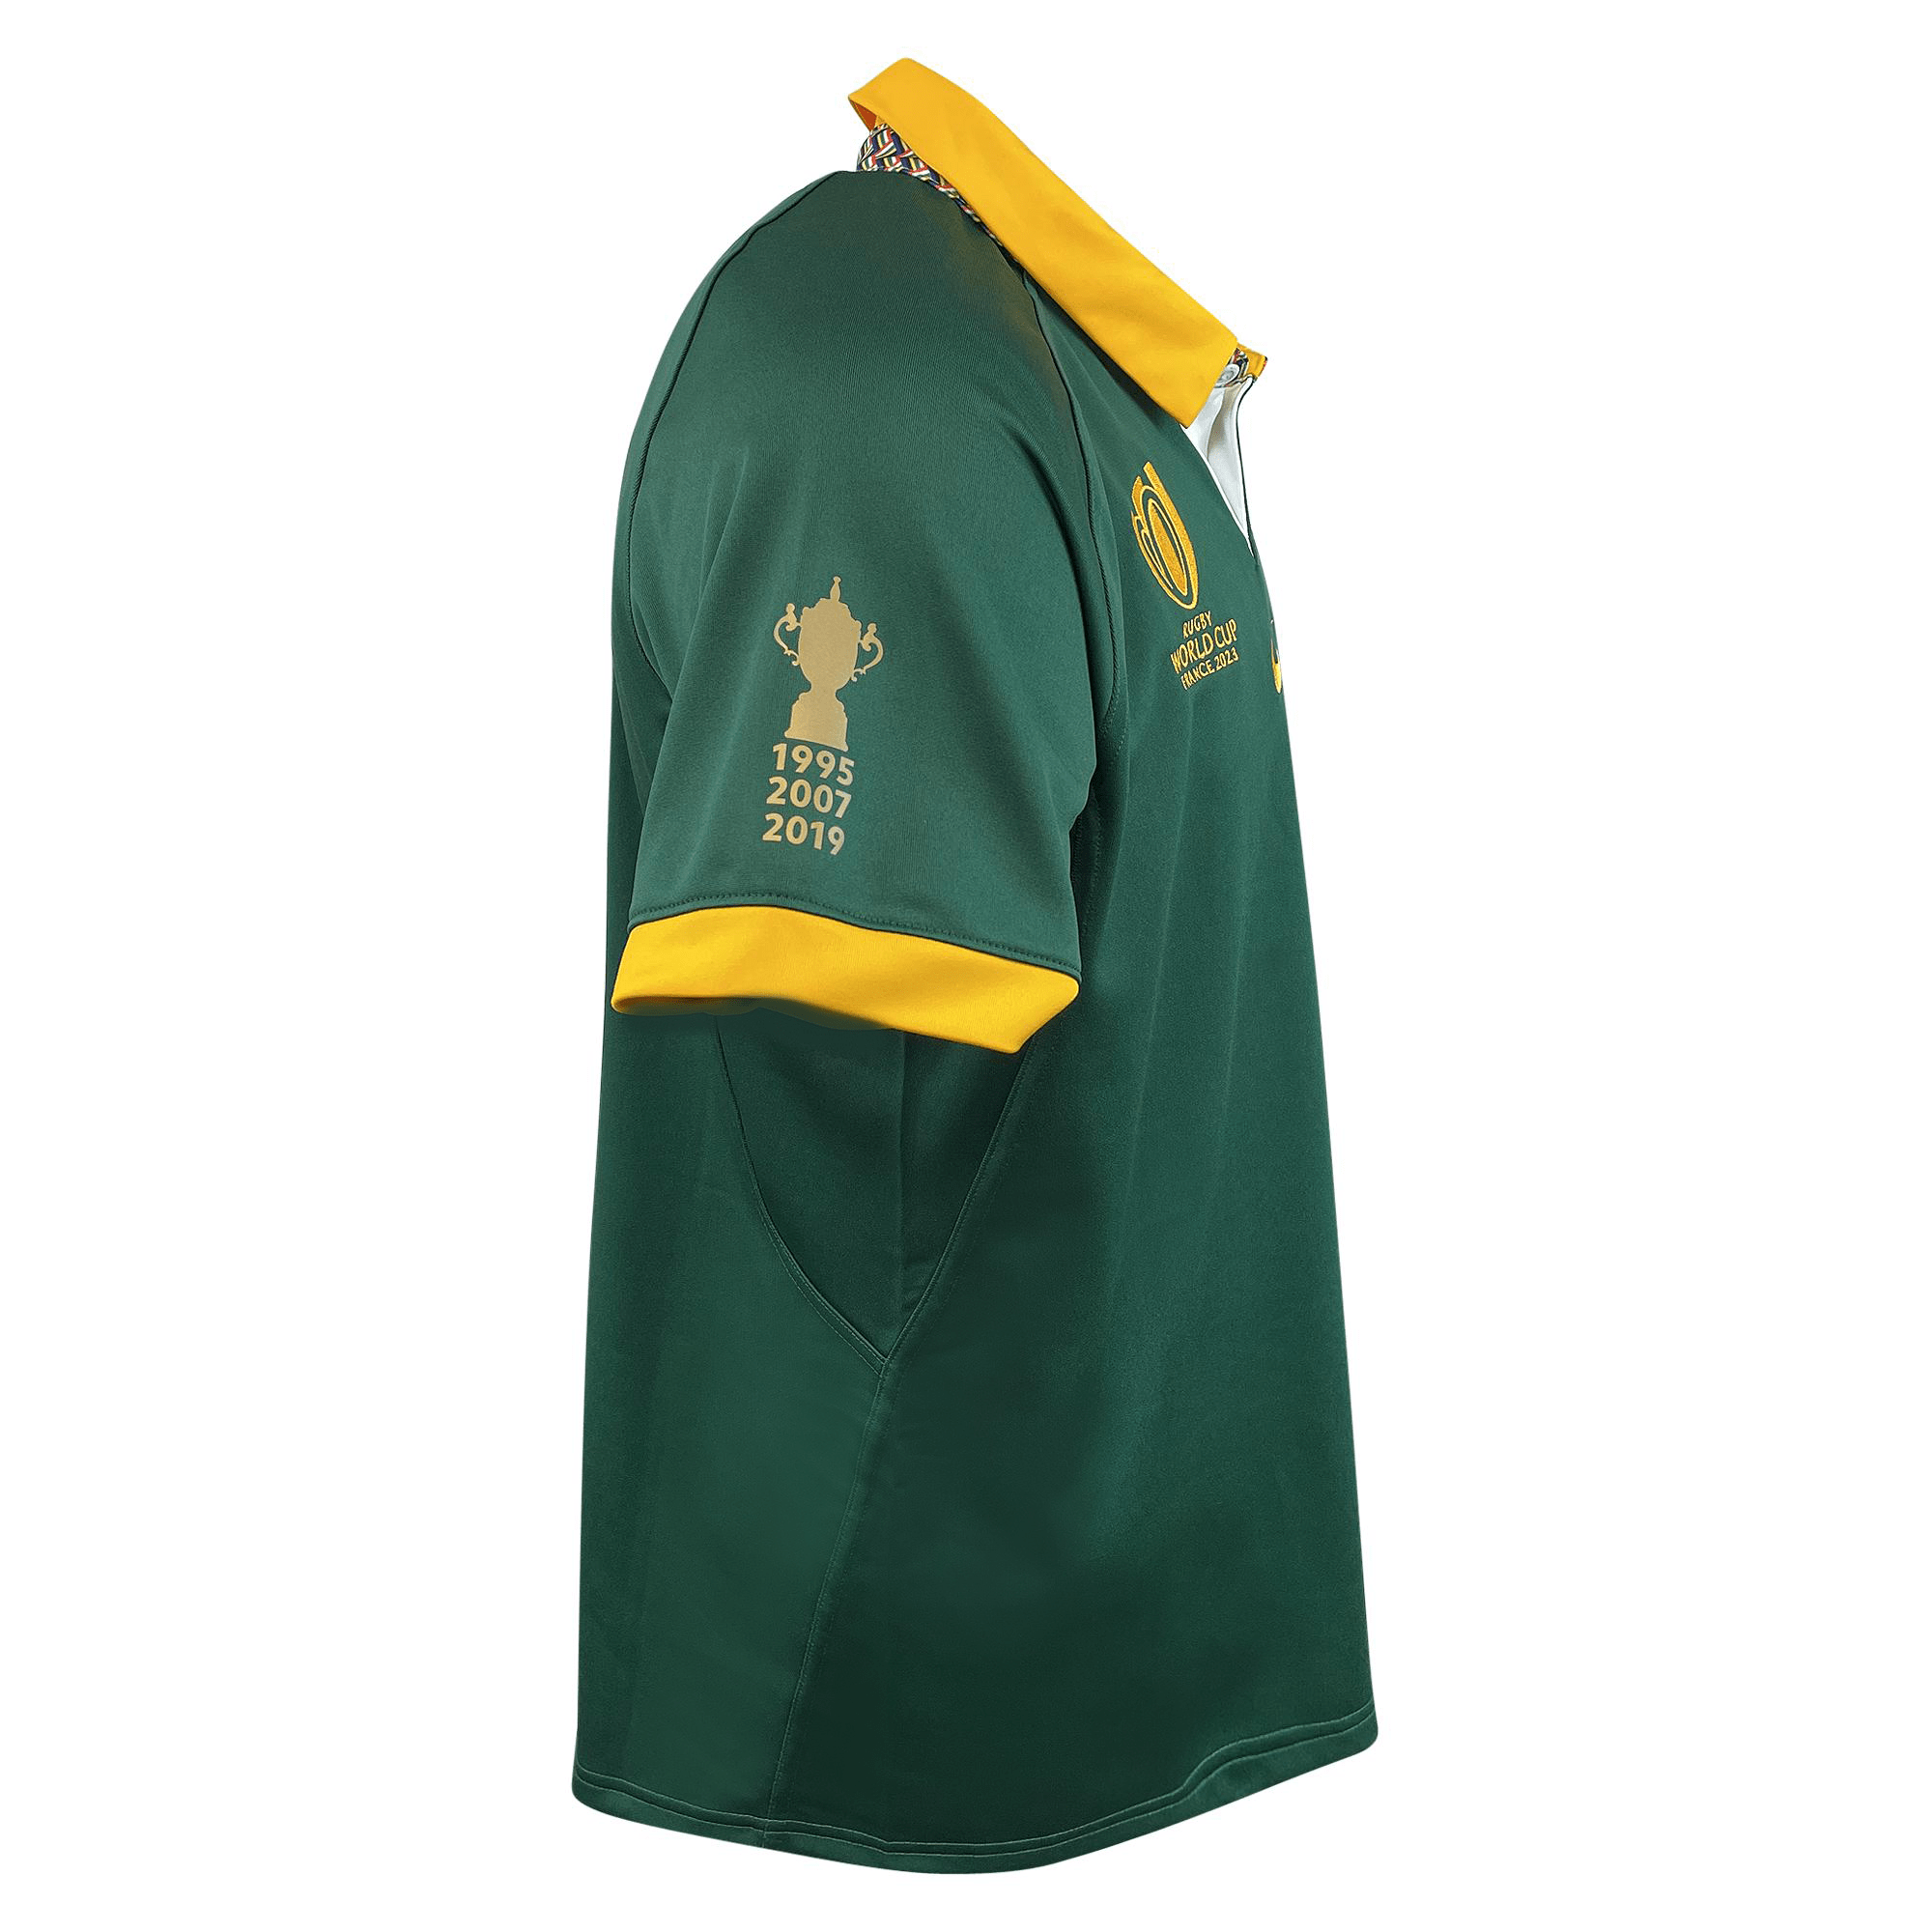 Springboks Rugby World Cup 2023 Replica Home Jersey by Nike Official SARU Gear